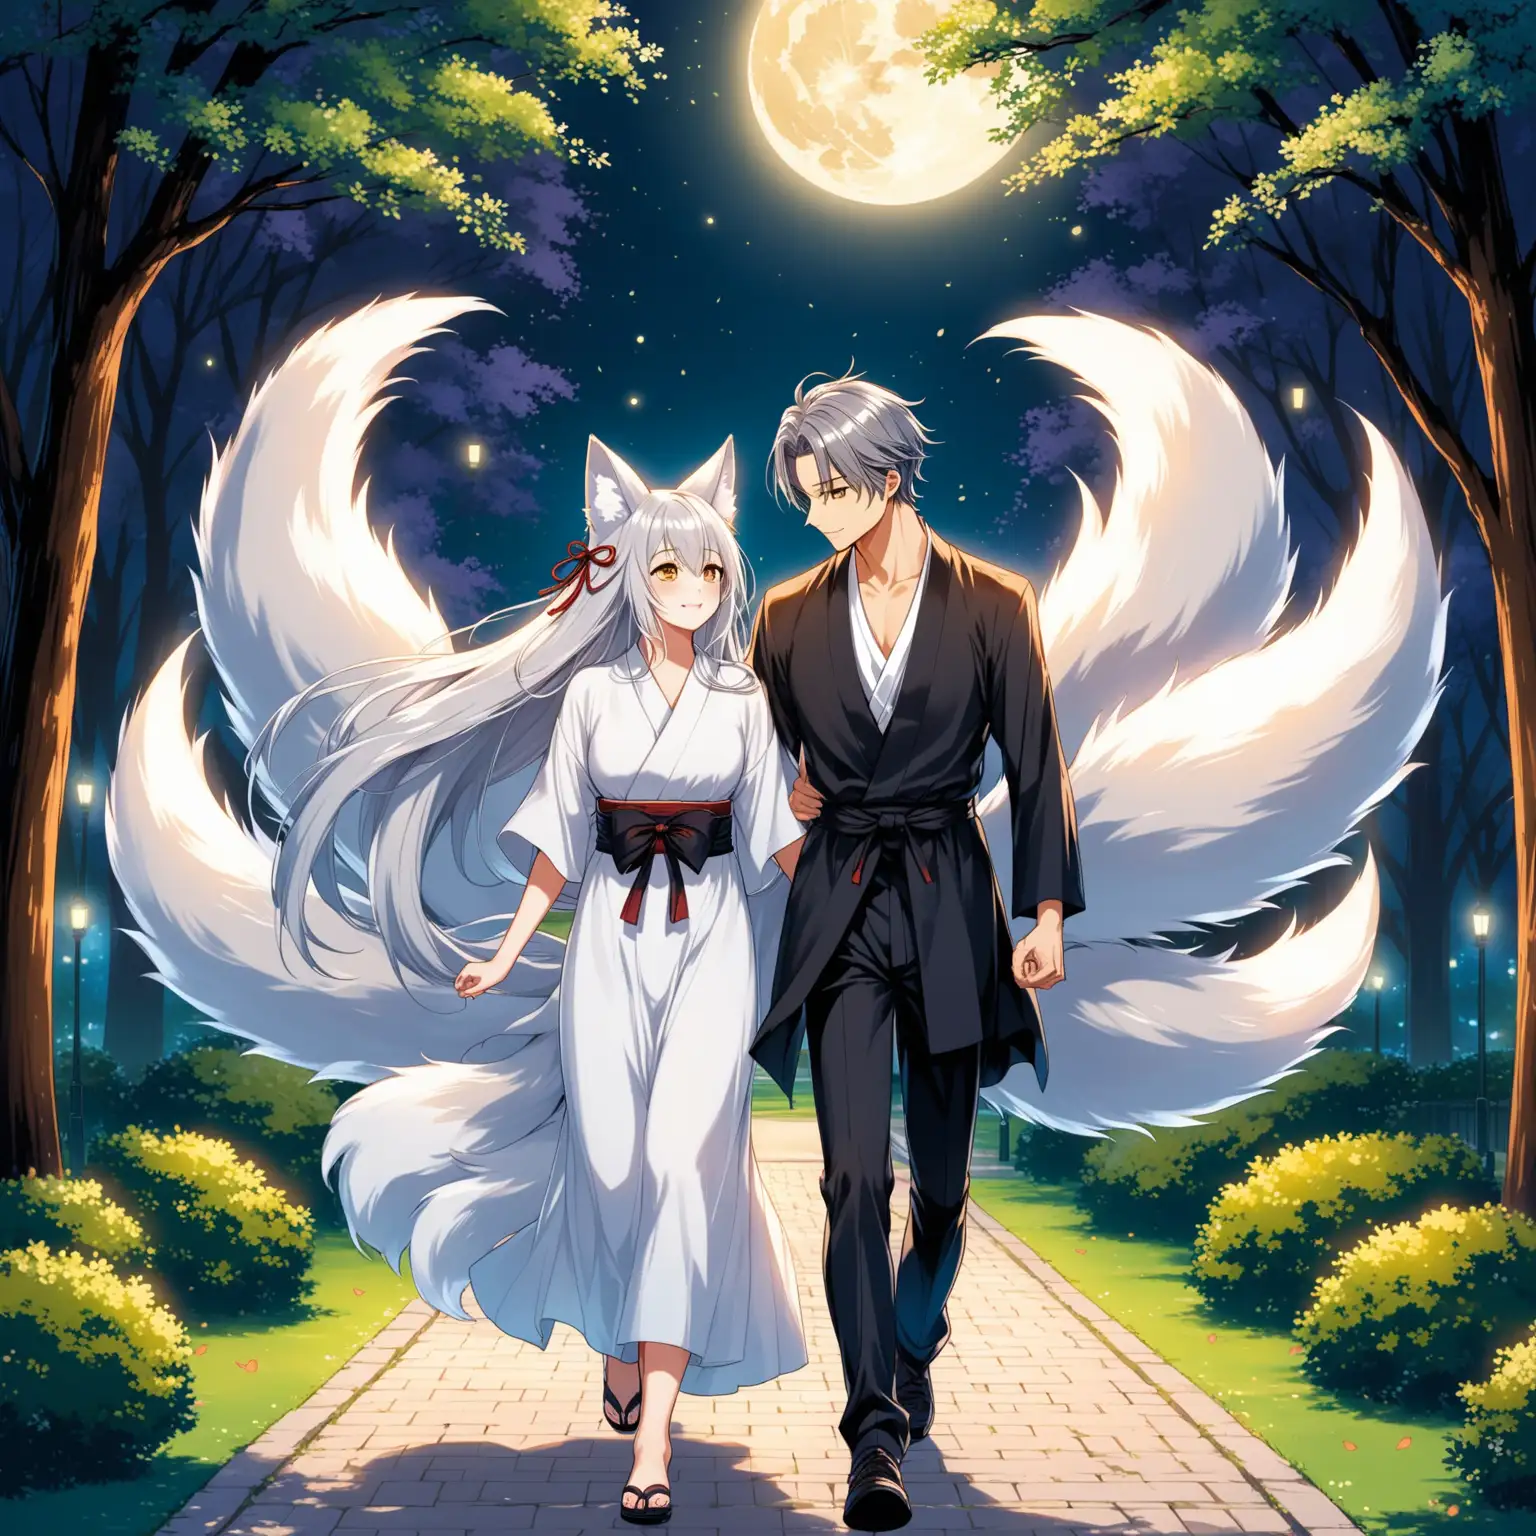 Moonlit Stroll of a Kitsune and Her Admirer